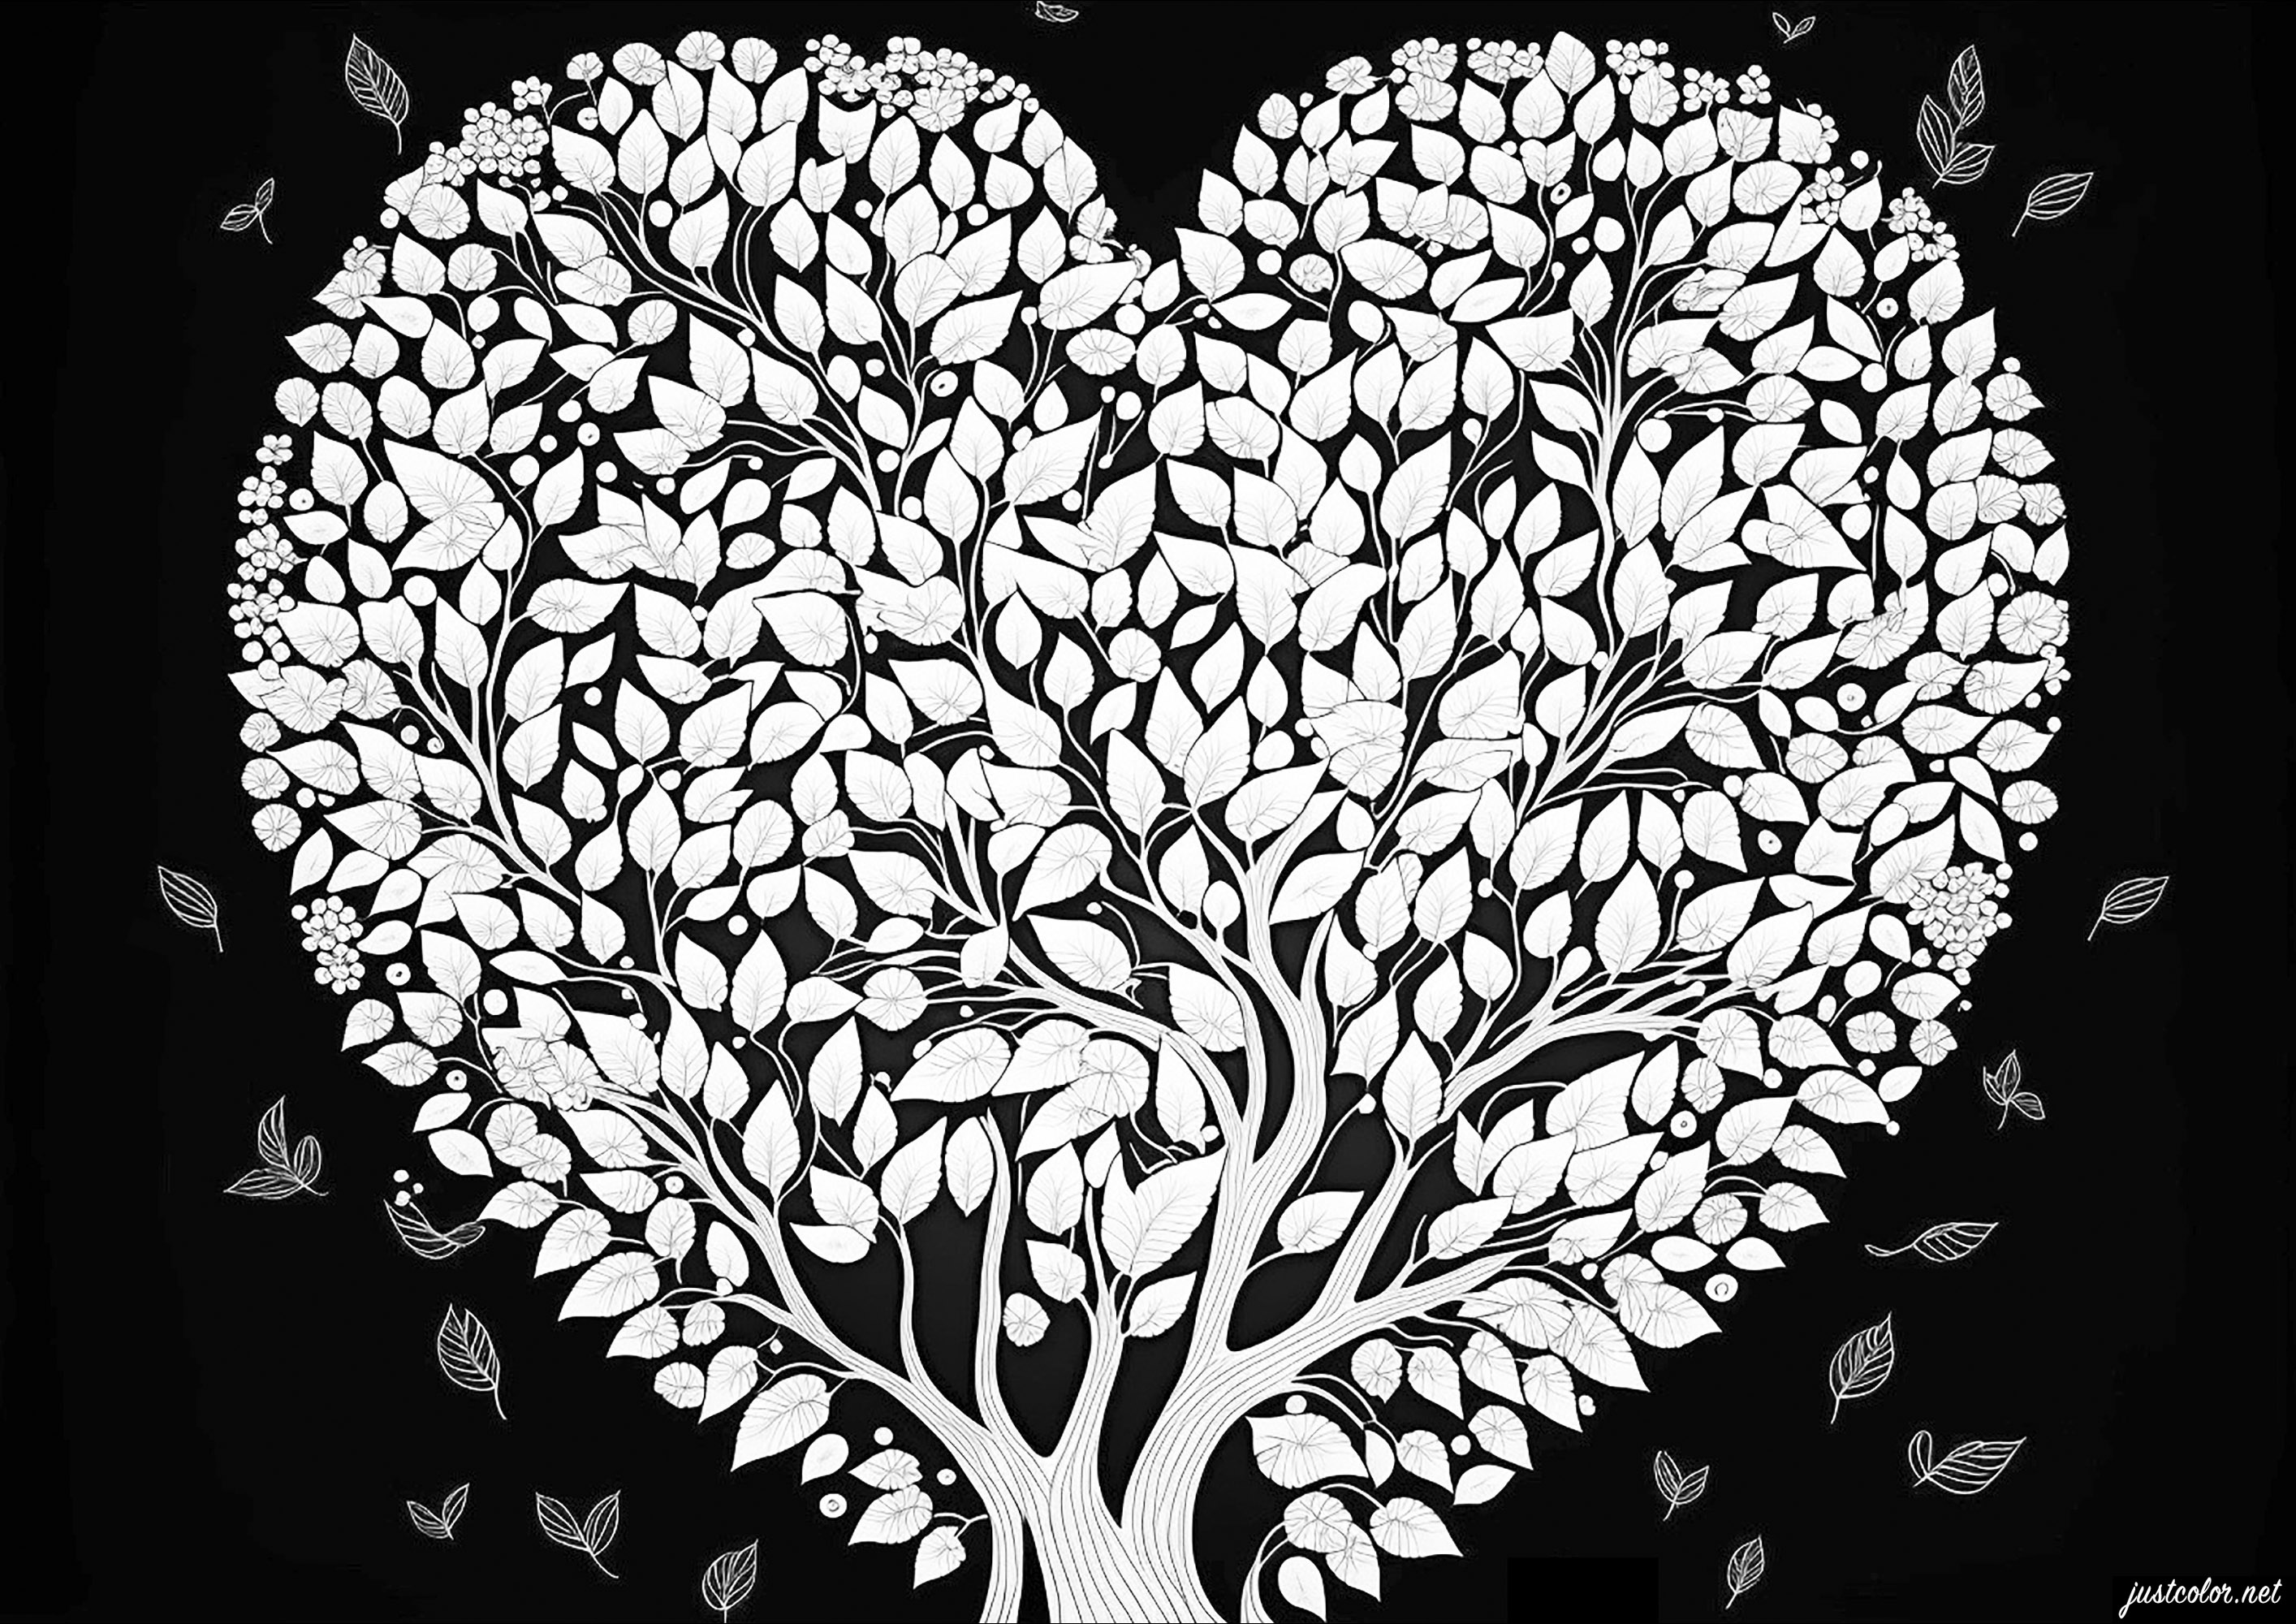 Love tree on a black background. Color this magnificent heart-shaped tree and its many elegant flowers.